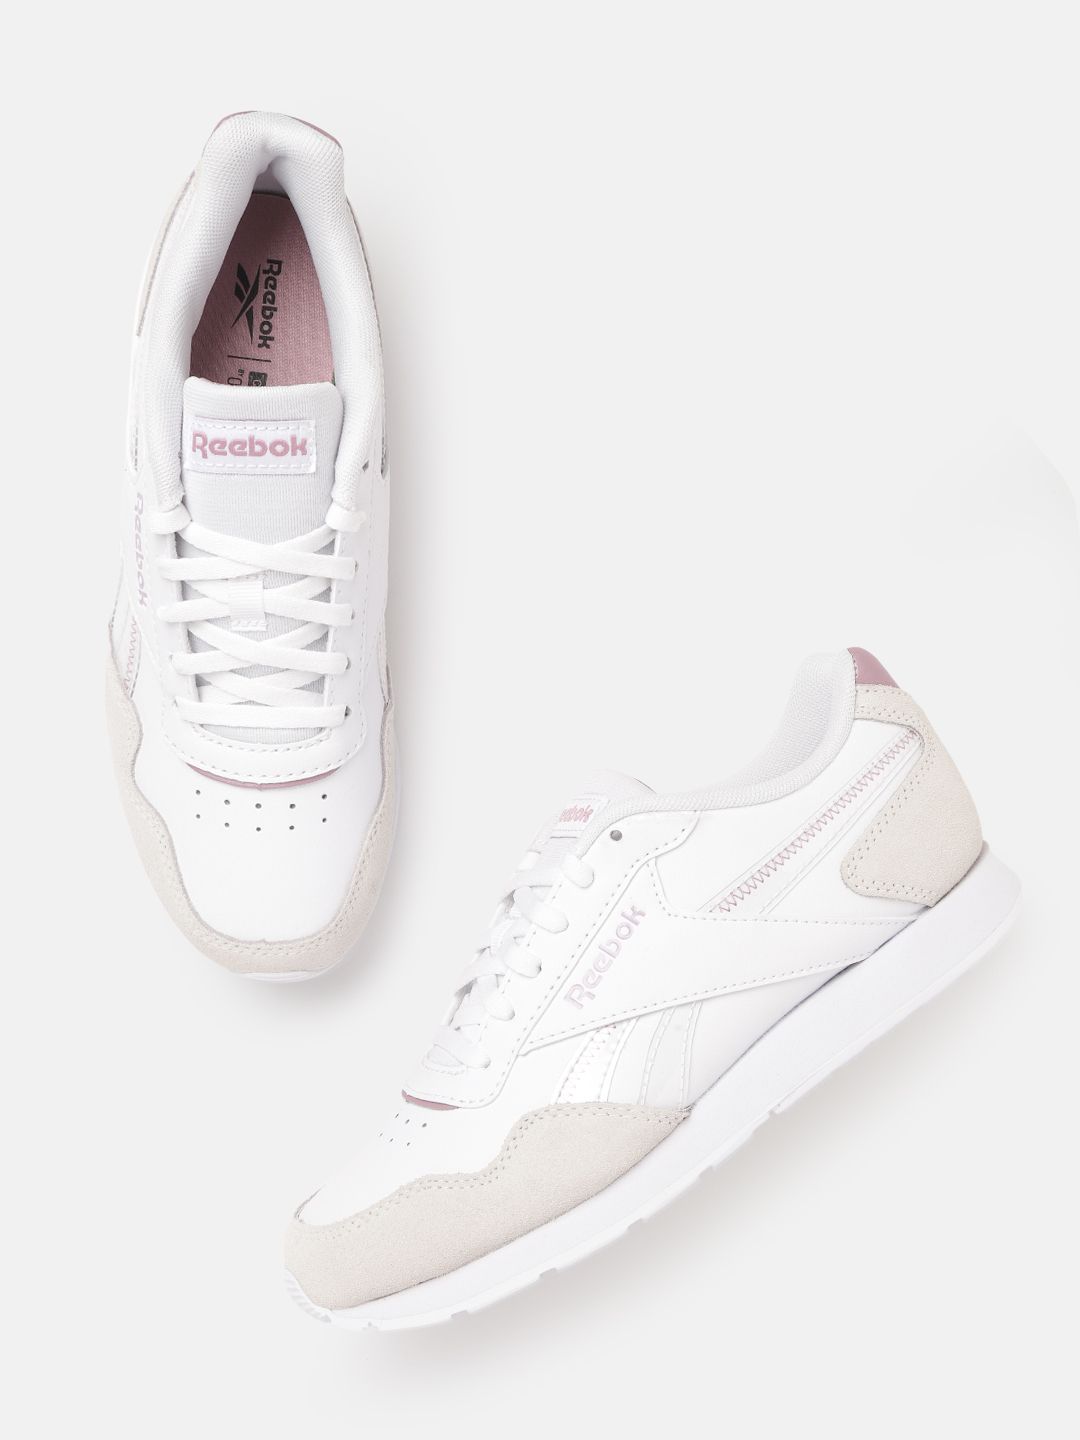 Reebok Classic Women White & Grey Perforated Royal Glide Leather Sneakers Excluding Trims Price in India